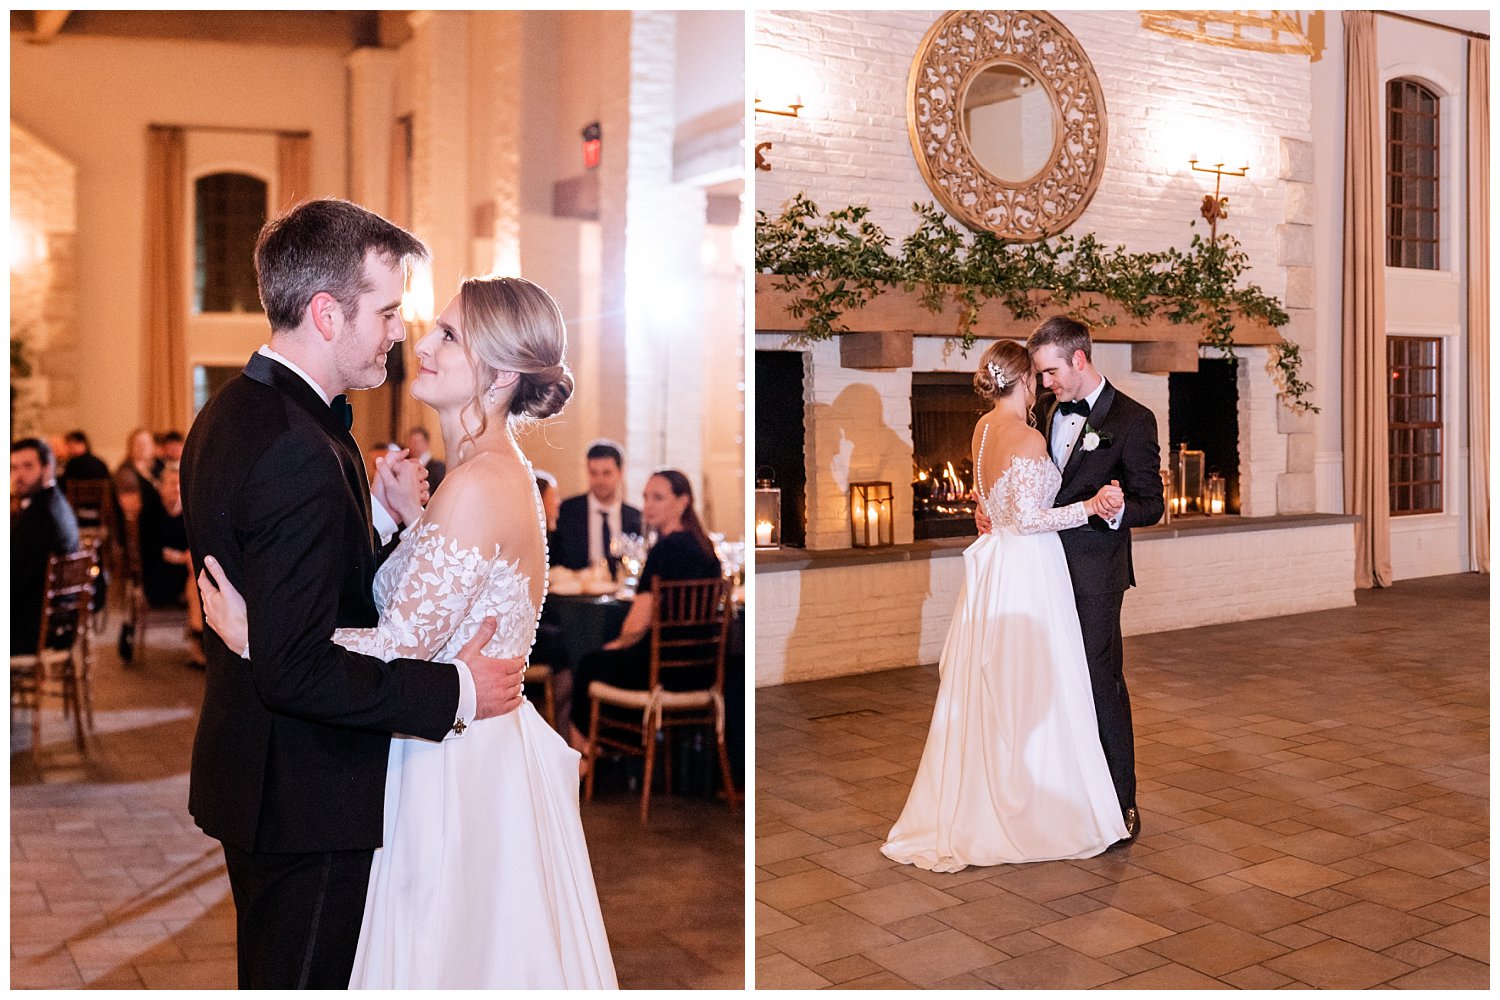 Bride and groom first dance at Early Mountain Vineyard wedding in Charlottesville, Virginia